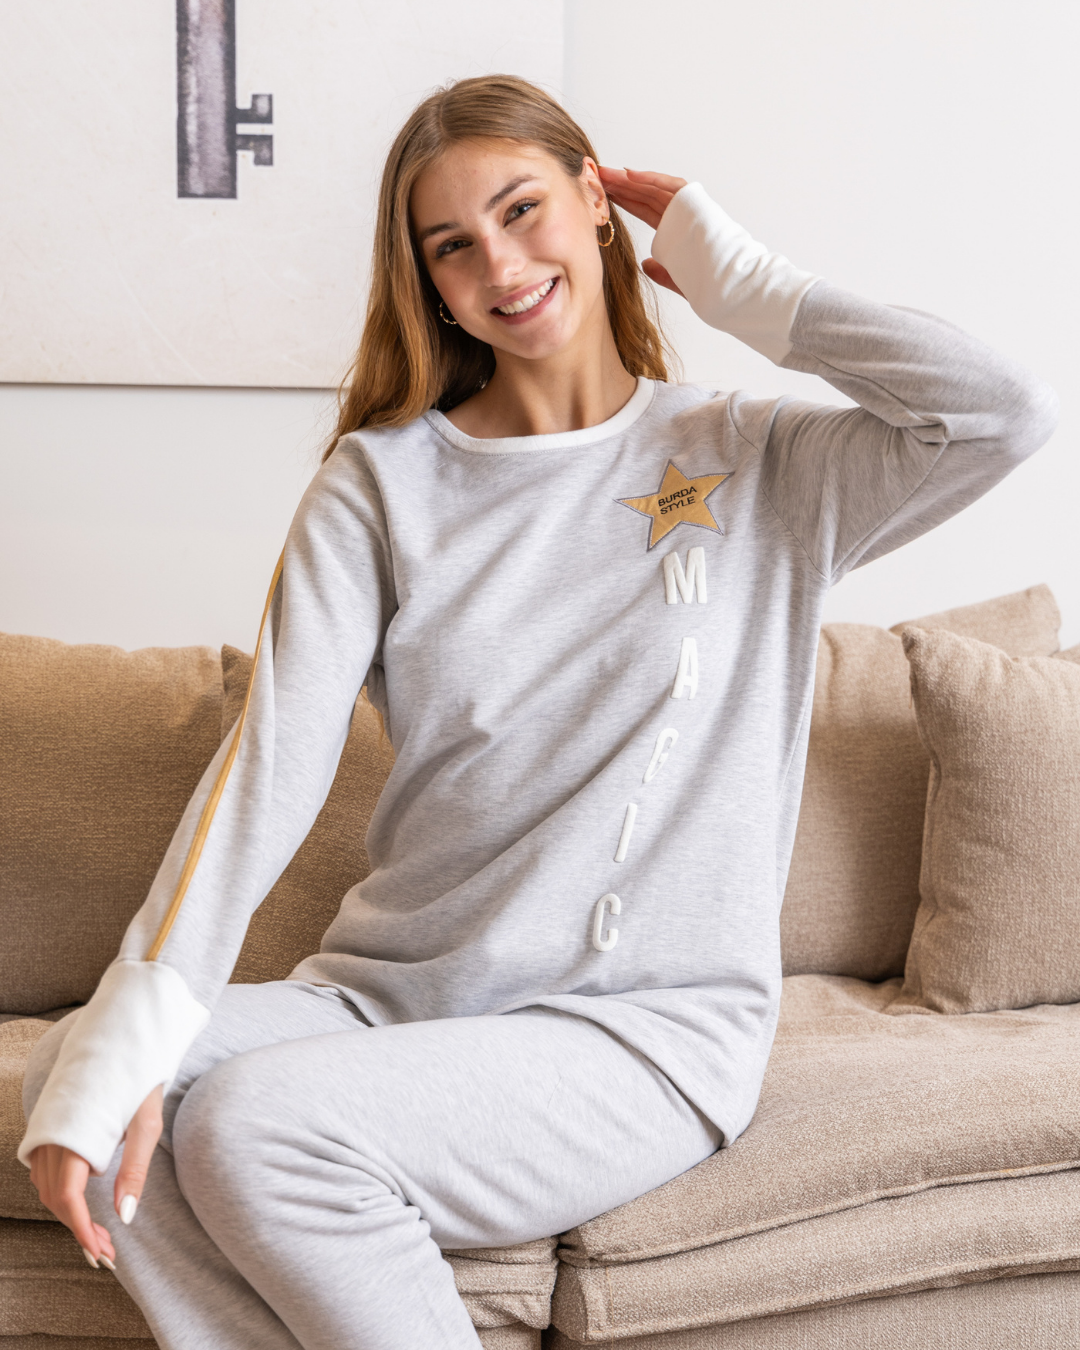 star Women's long-sleeved pajamas with star embroidery